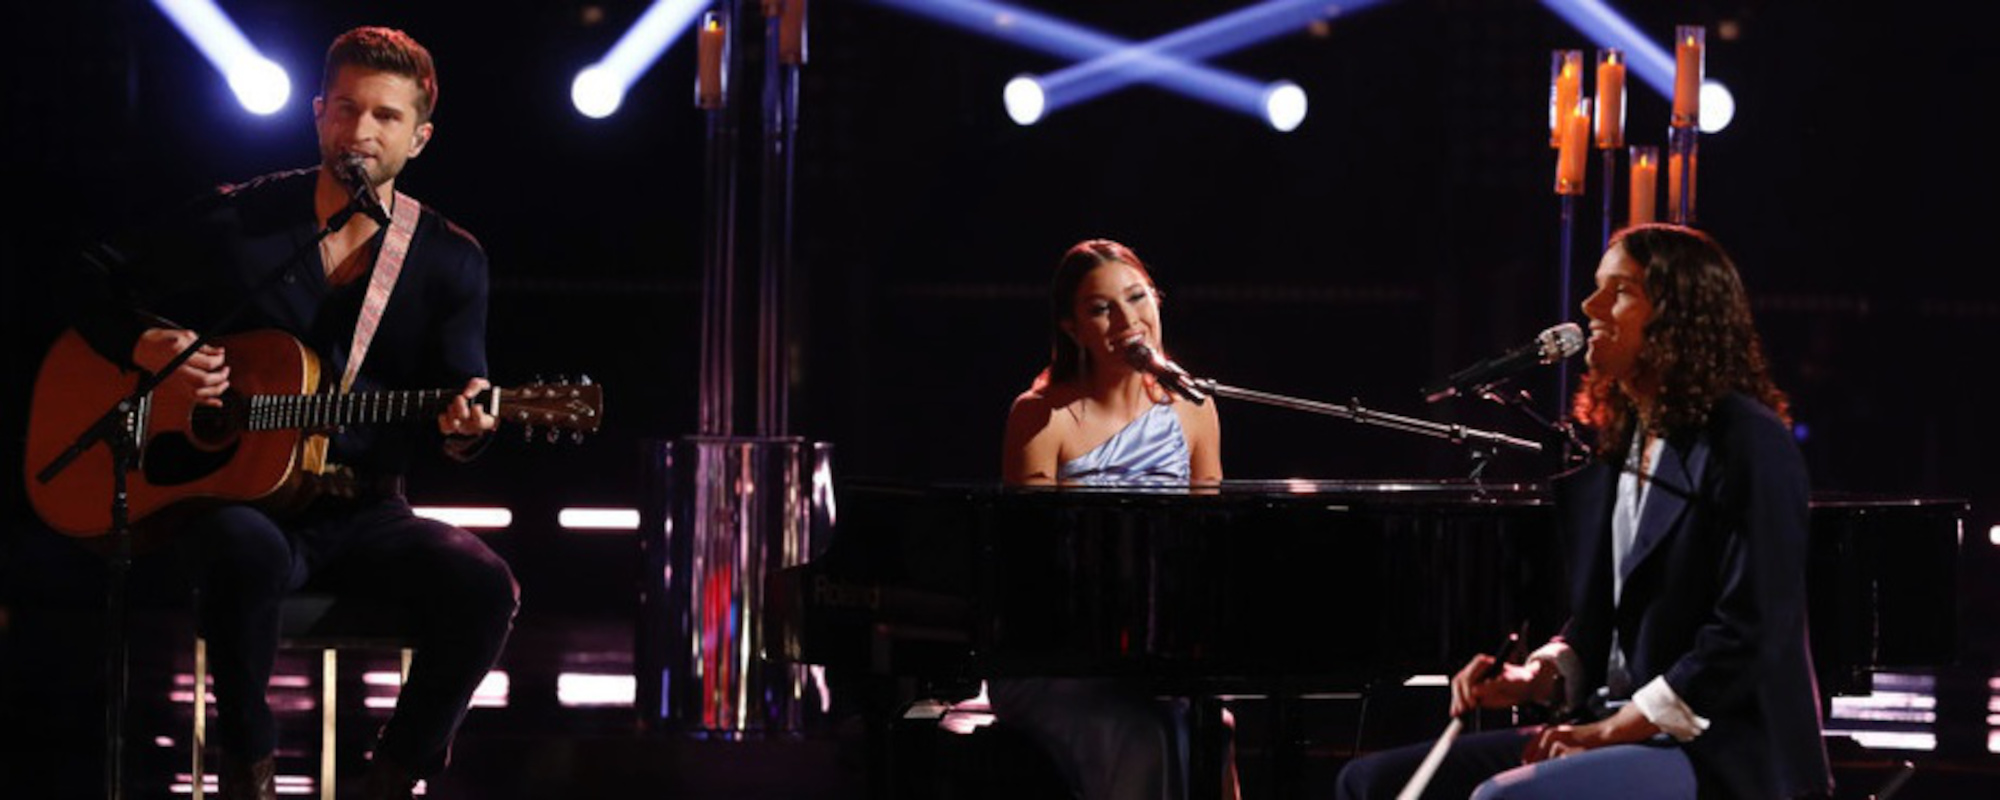 ‘The Voice’: Girl Named Tom Wows Playoff Crowd With Intimate Performance of Ingrid Andress’ “More Hearts Than Mine”